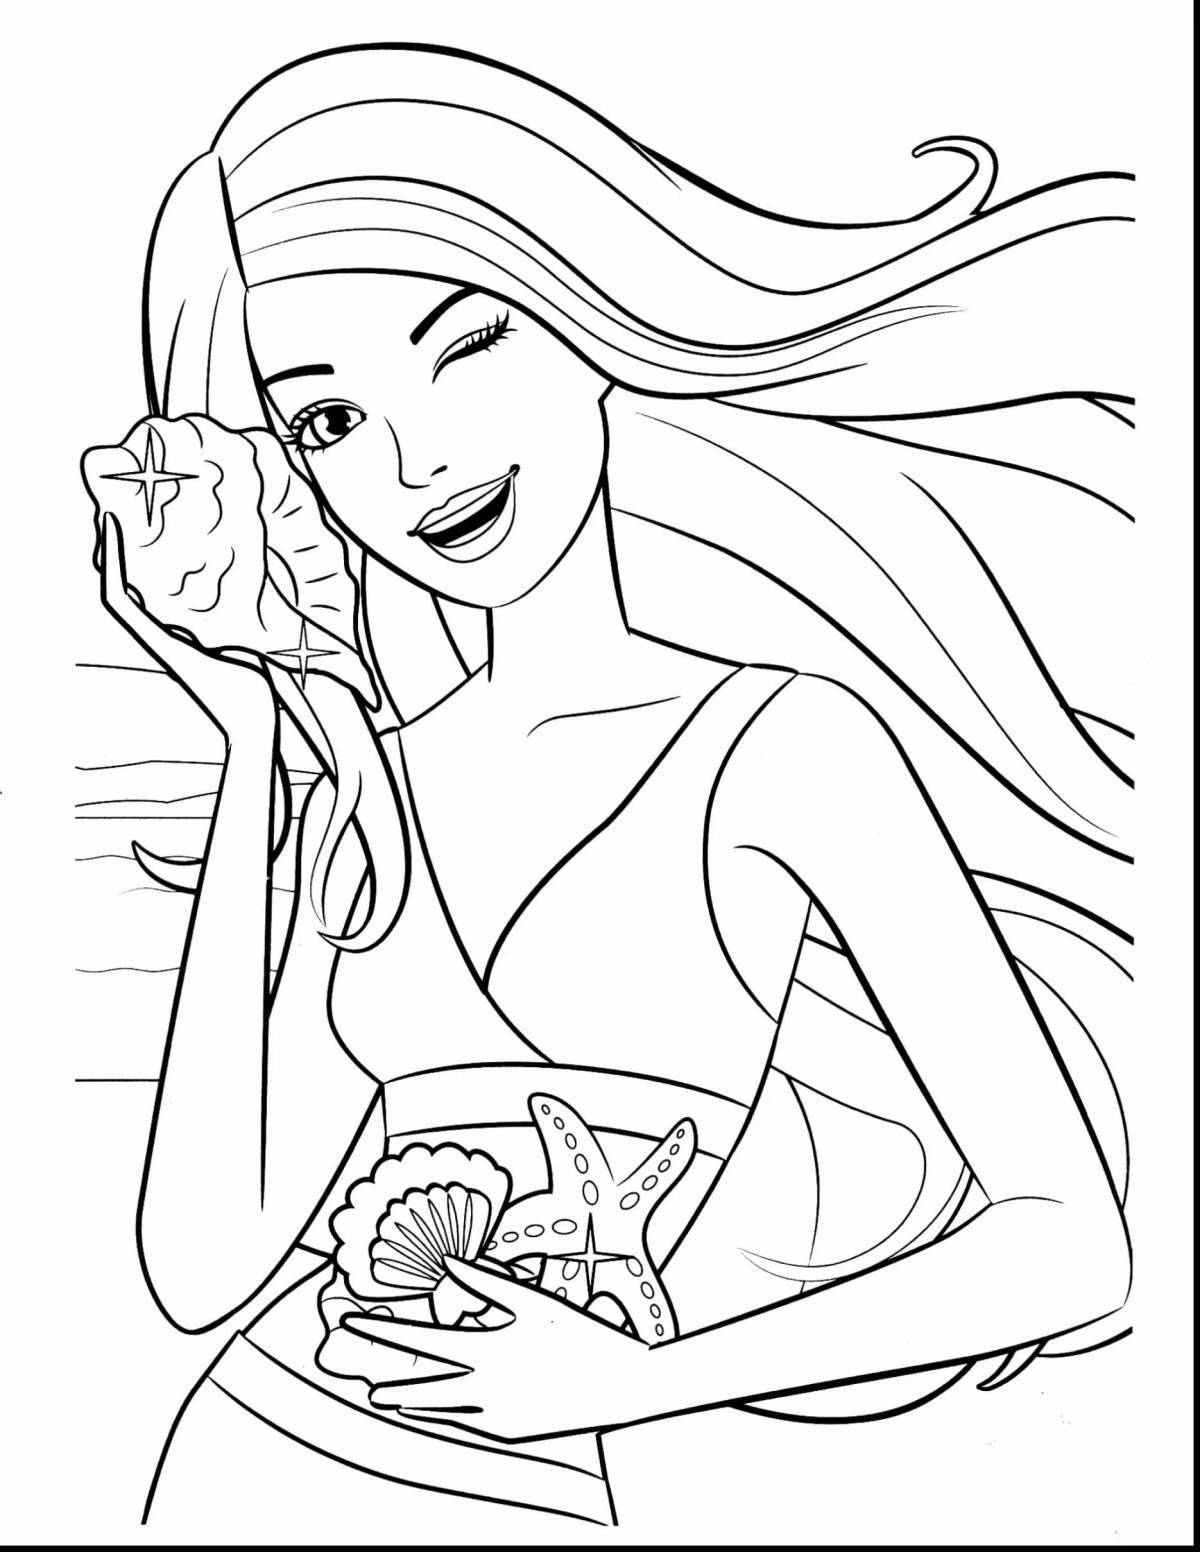 Great barbie coloring book for kids 6-7 years old